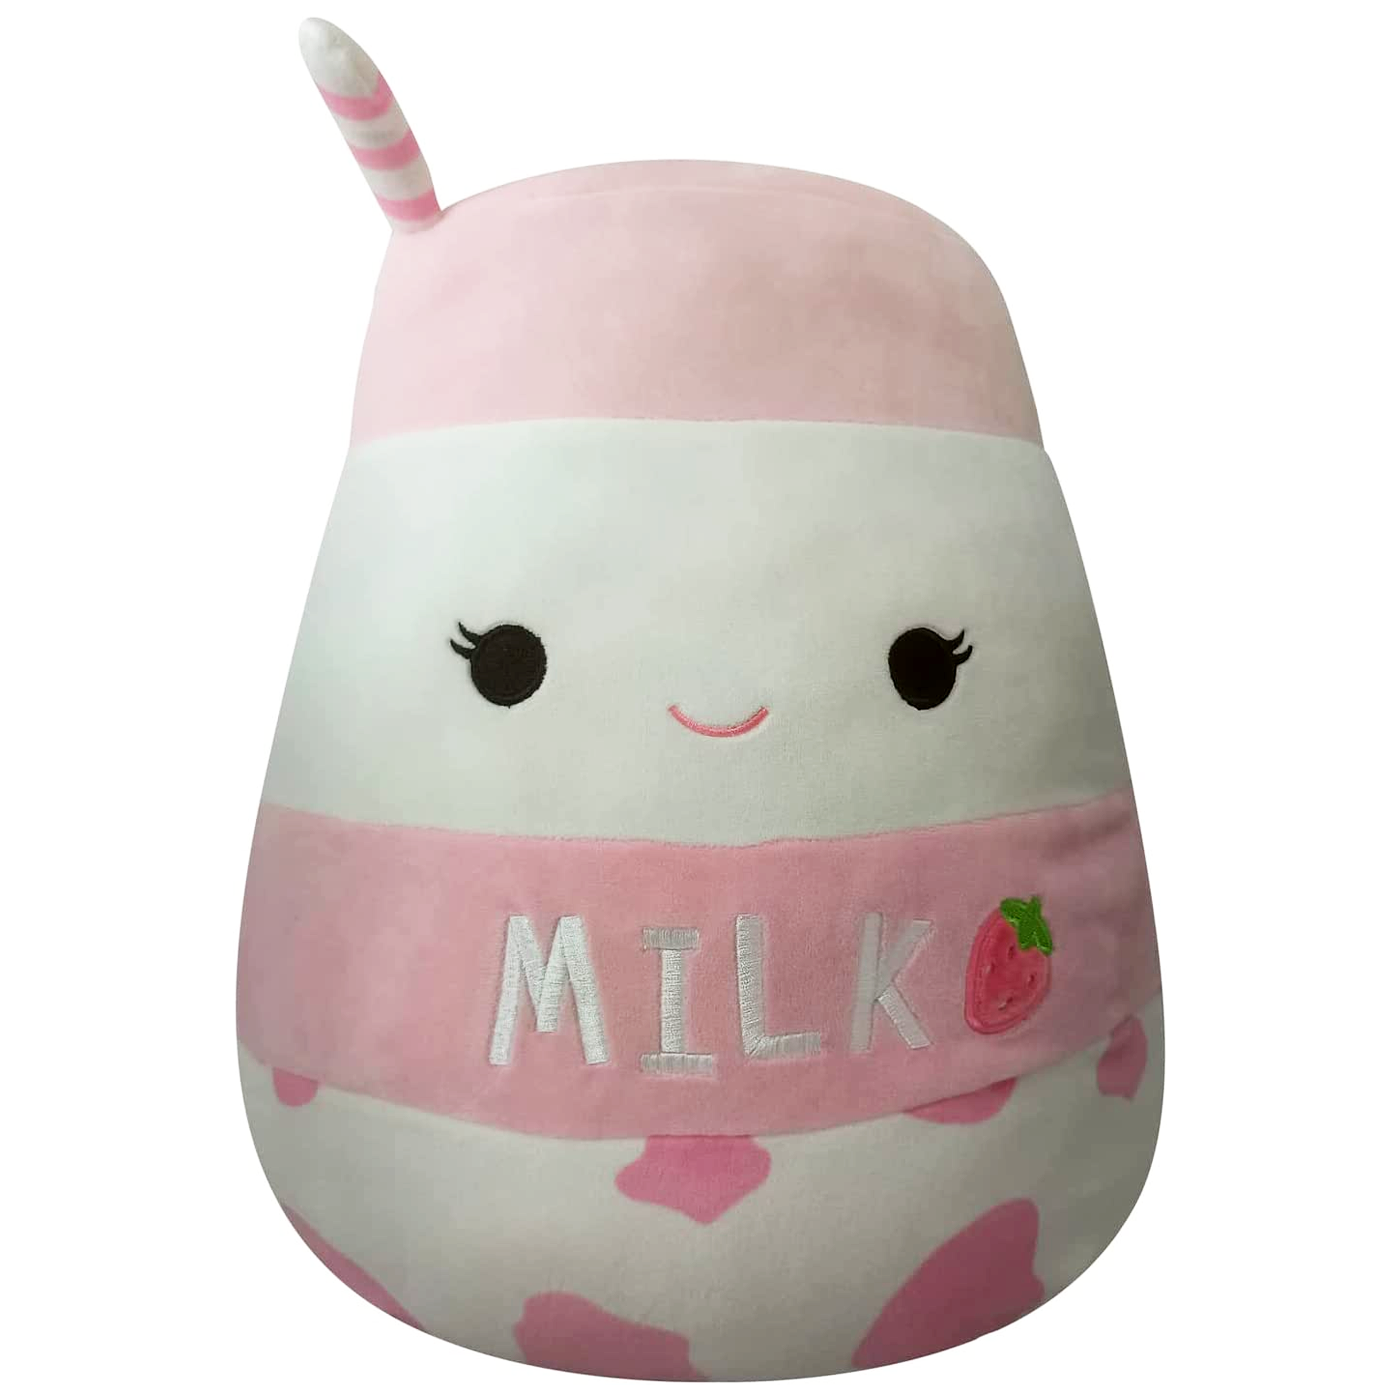 https://static.wikia.nocookie.net/squishmallowsquad/images/e/e2/Amelie.png/revision/latest?cb=20220815110111